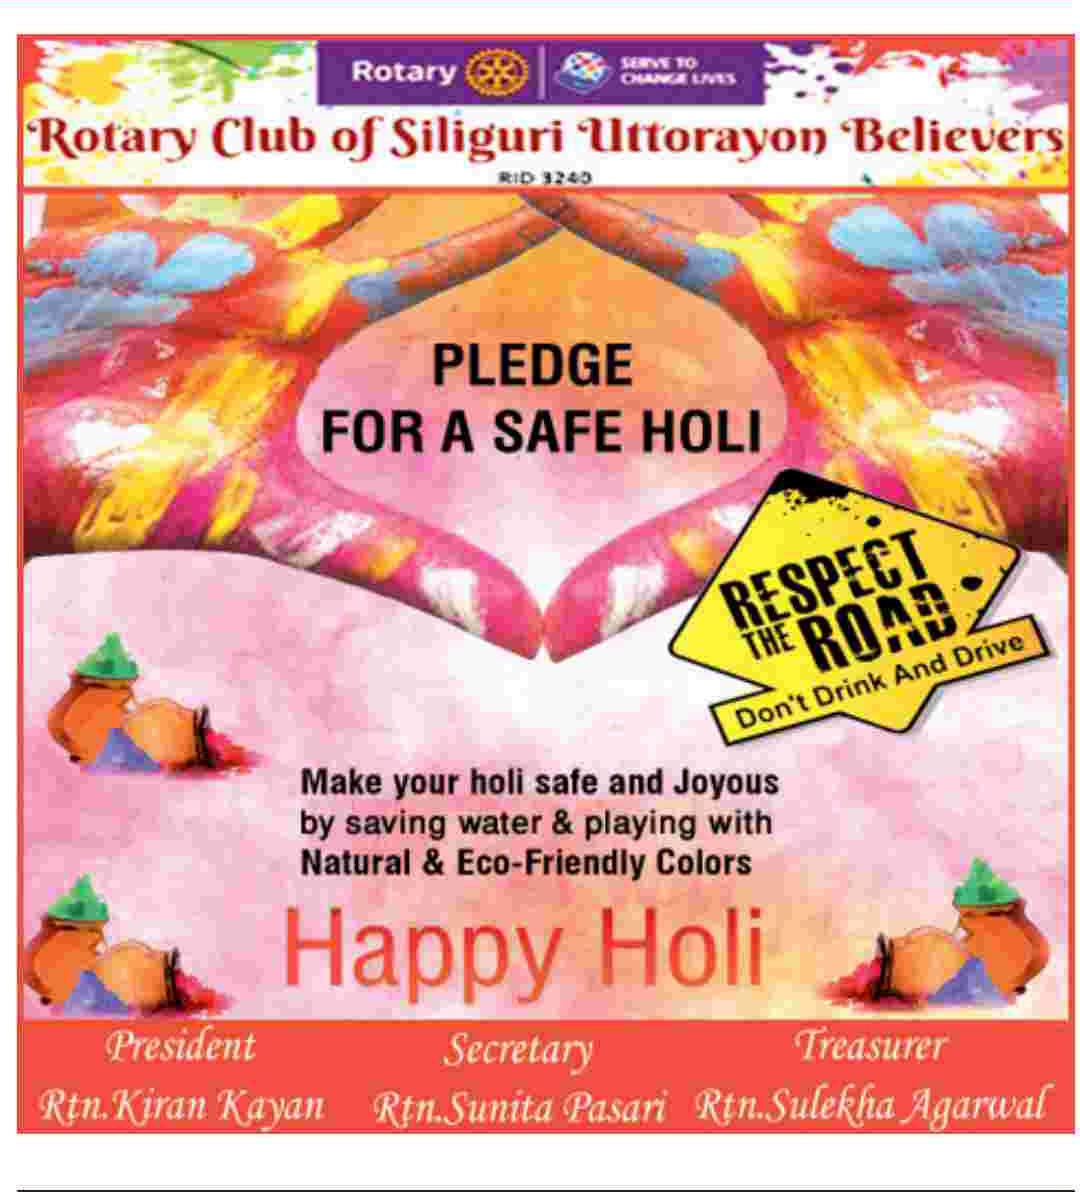 Awareness on safety in holi and save water